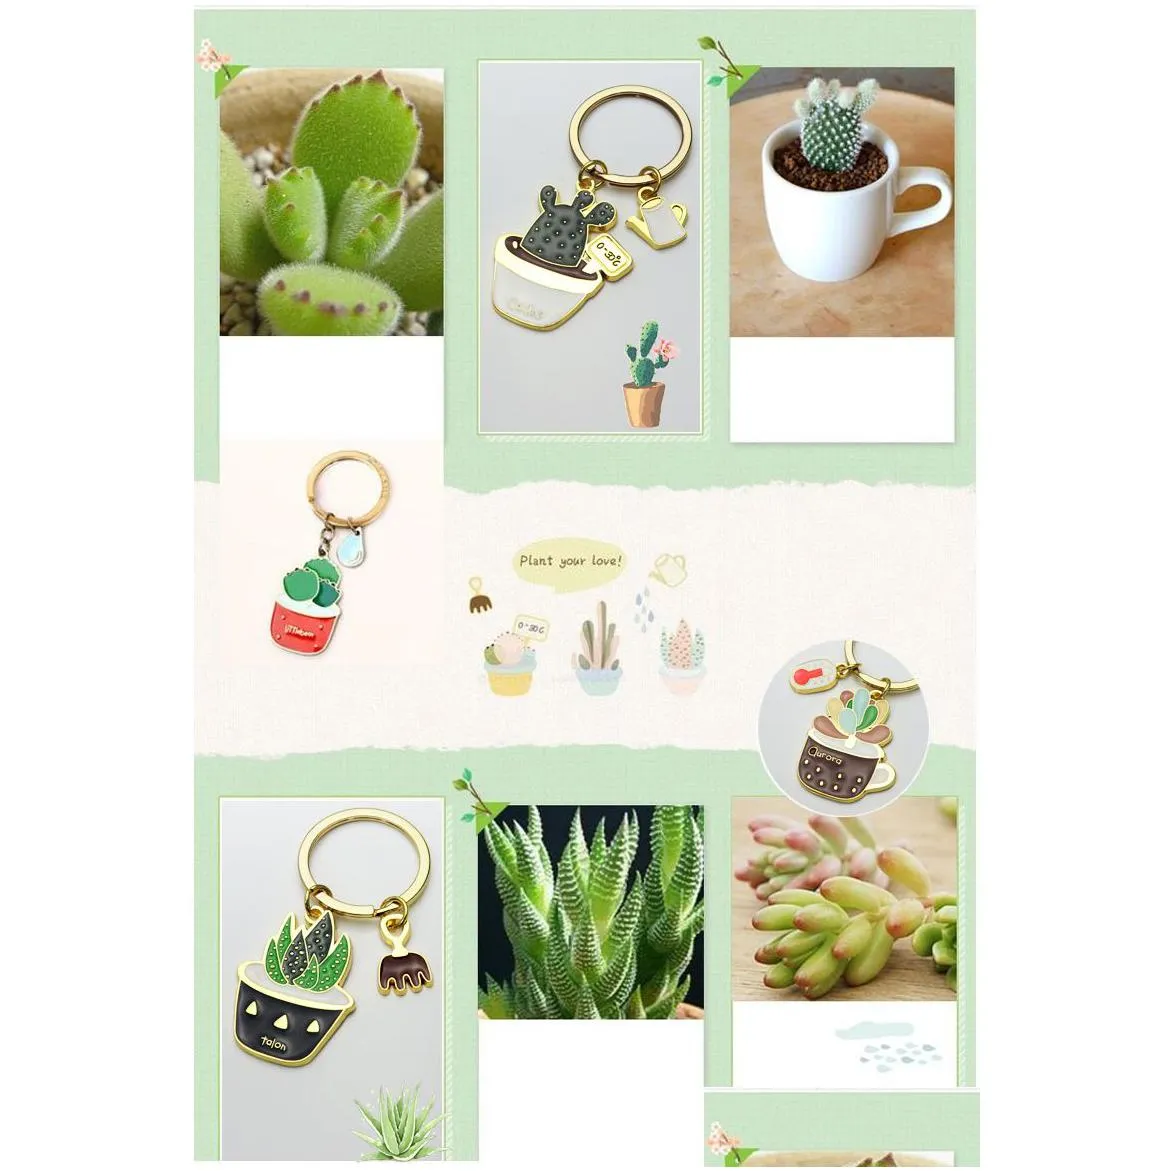 lovely cactus keychains women potted succulent plants shaped keychain ring gold car key chains good gift for friend